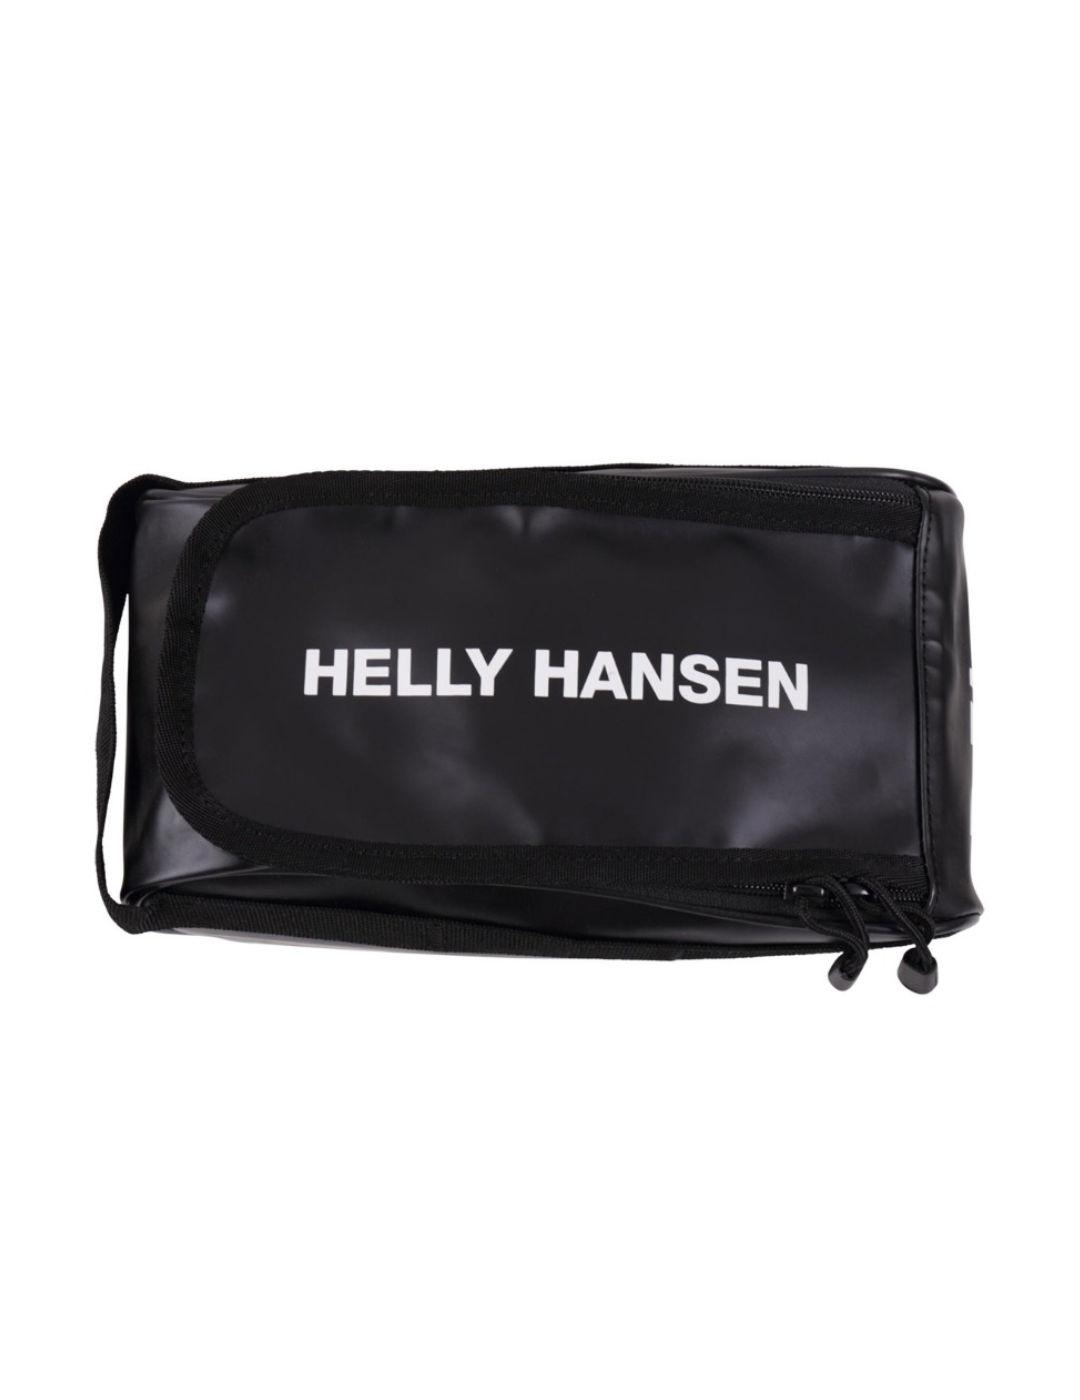 Neceser Helly Hansen Scout negro y blanco impermeable unisex